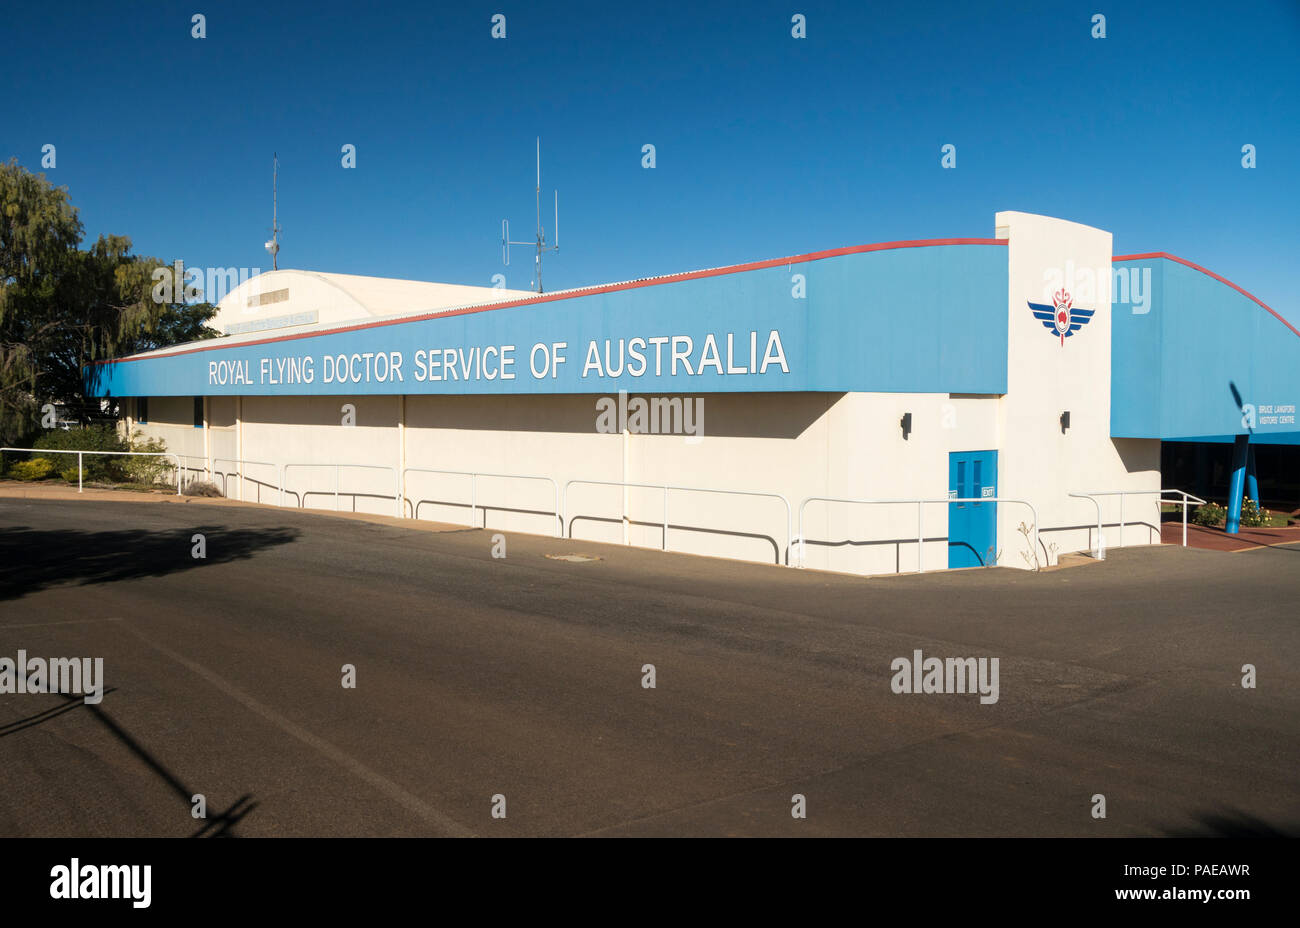 Royal Flying Doctor Service building in the outback, Broken Hill, New South  Wales, Australia Stock Photo - Alamy